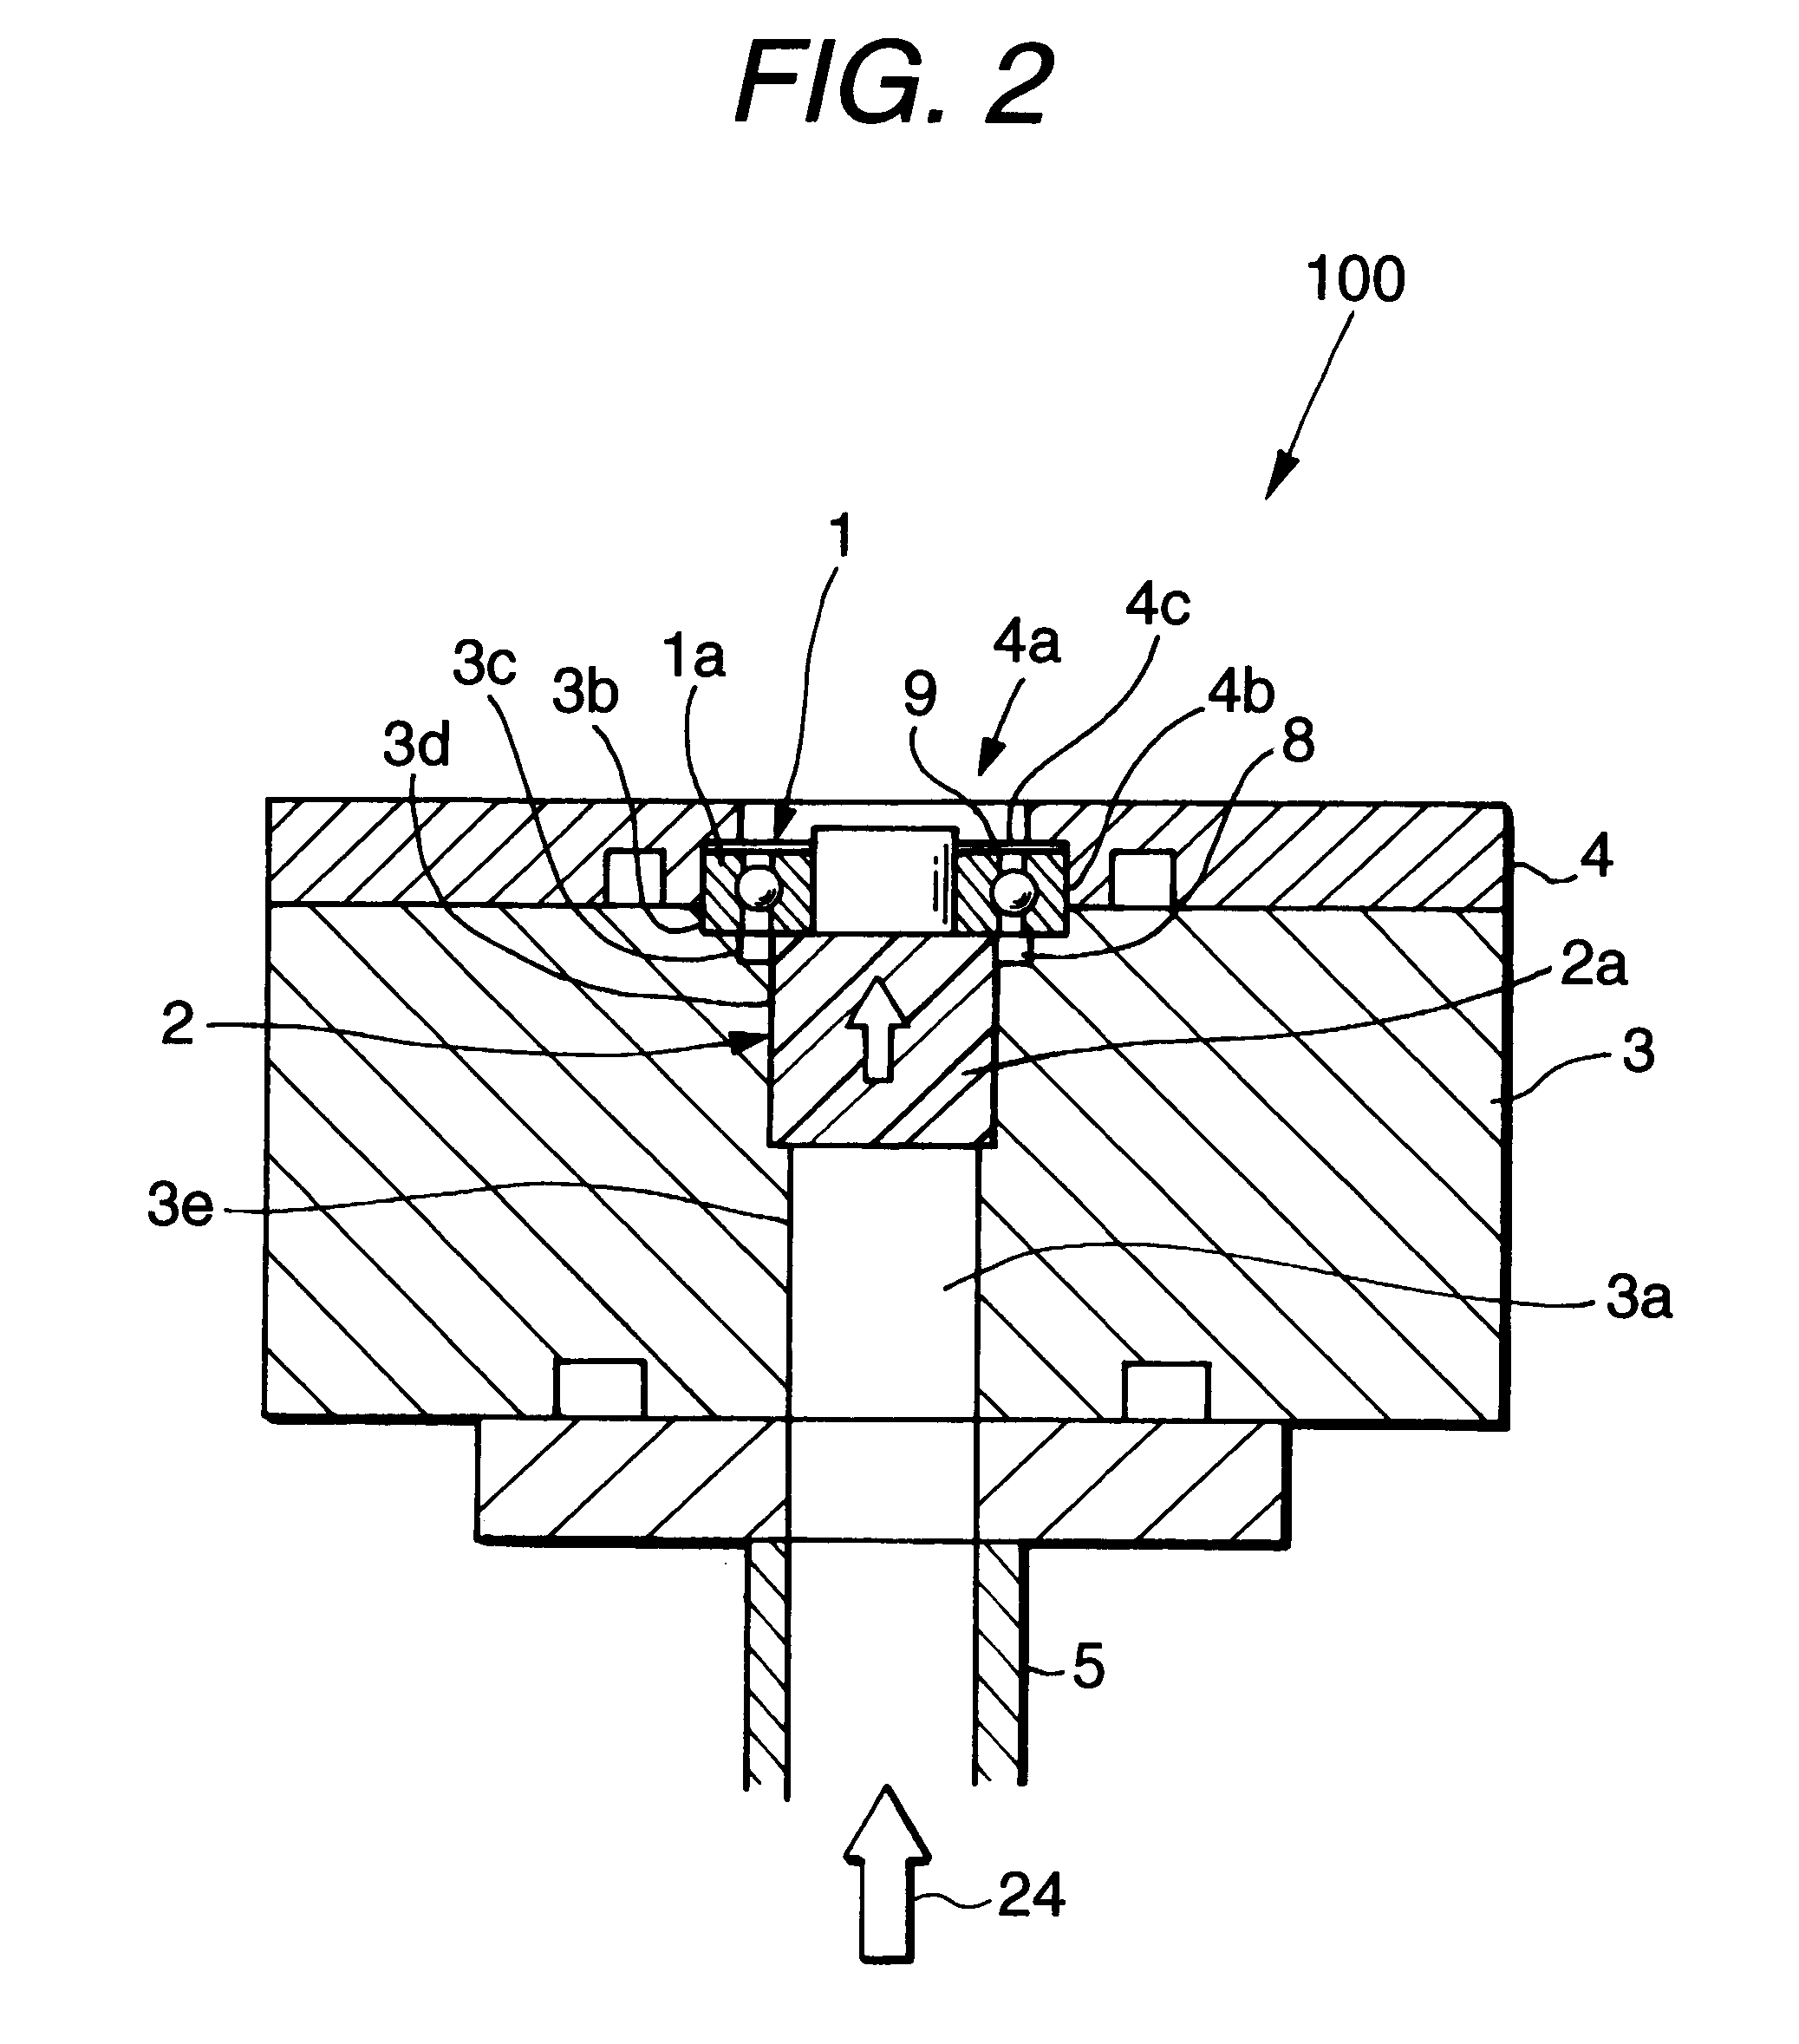 Ball/roller bearing cleaning apparatus